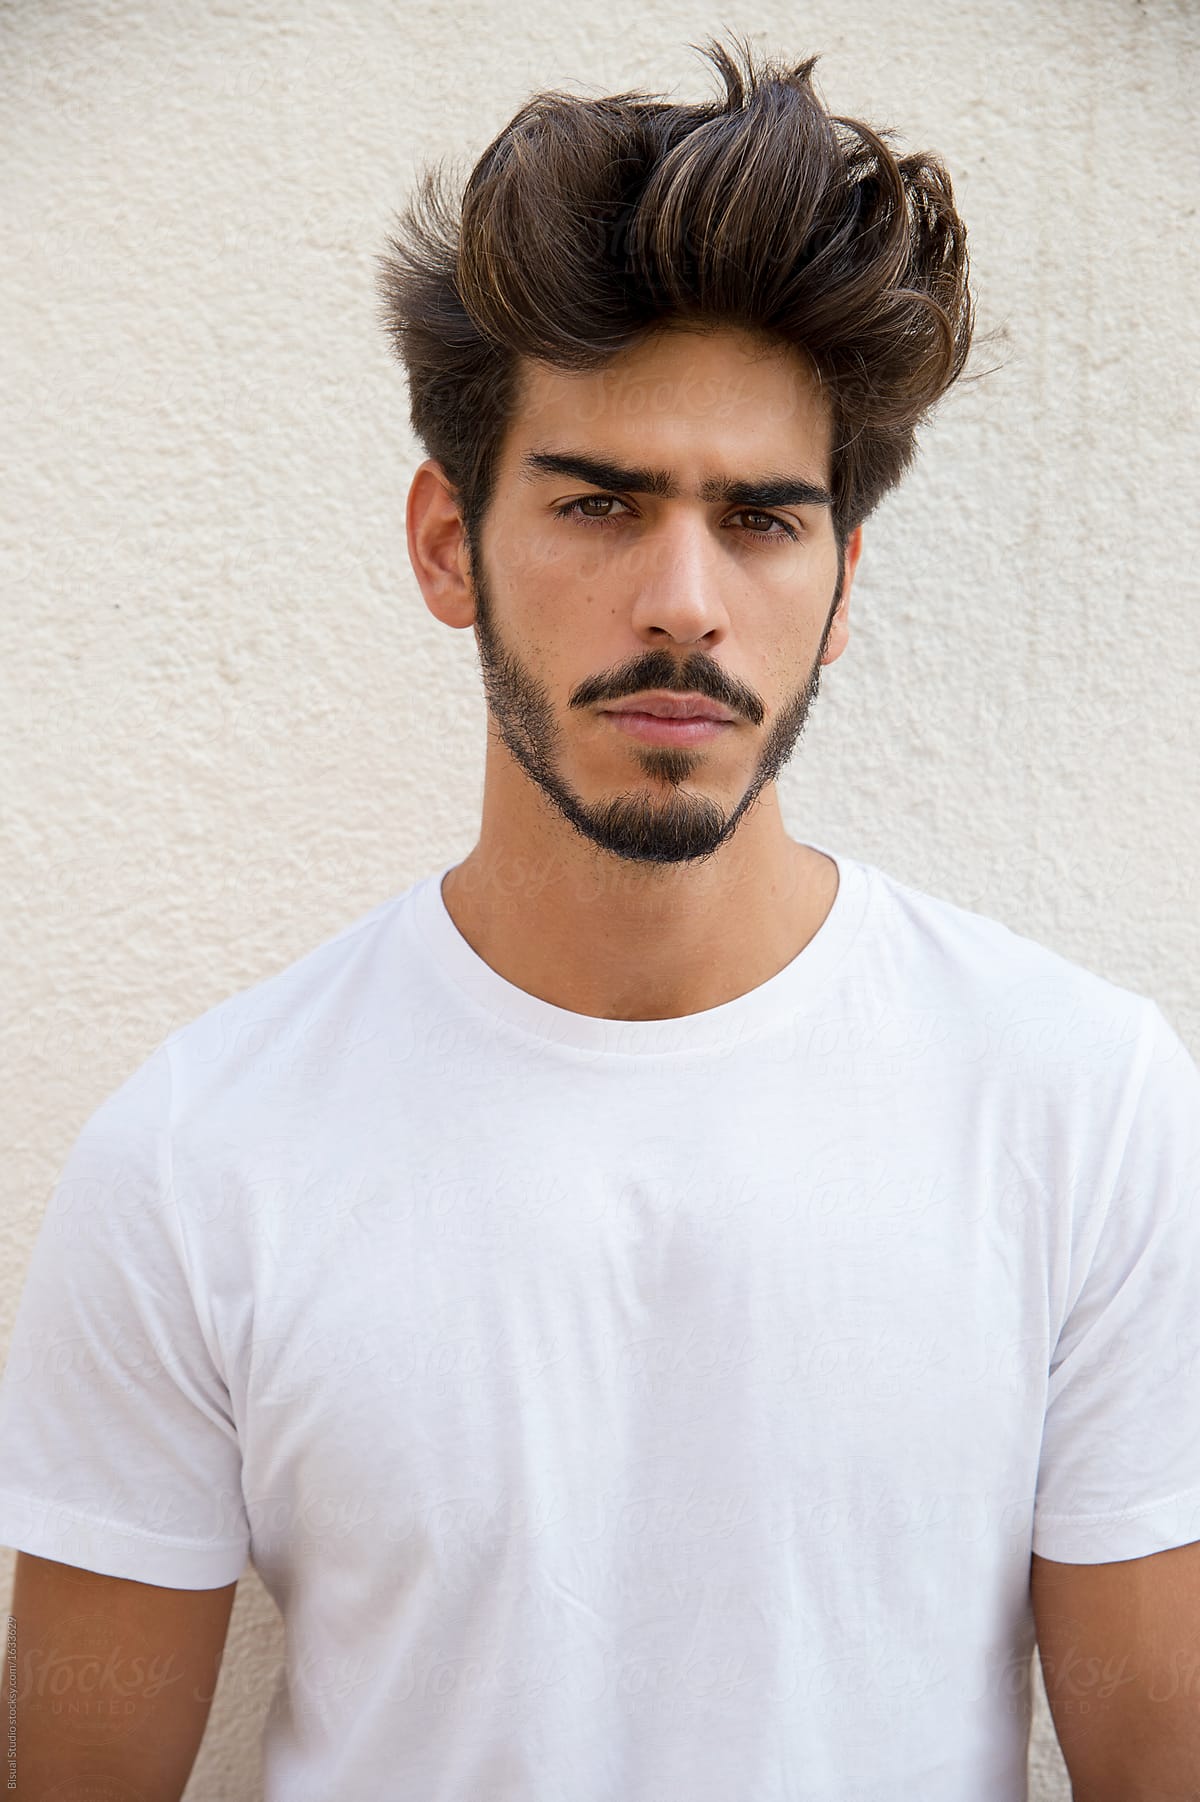 Portrait of a handsome young man with goatee looking at camera